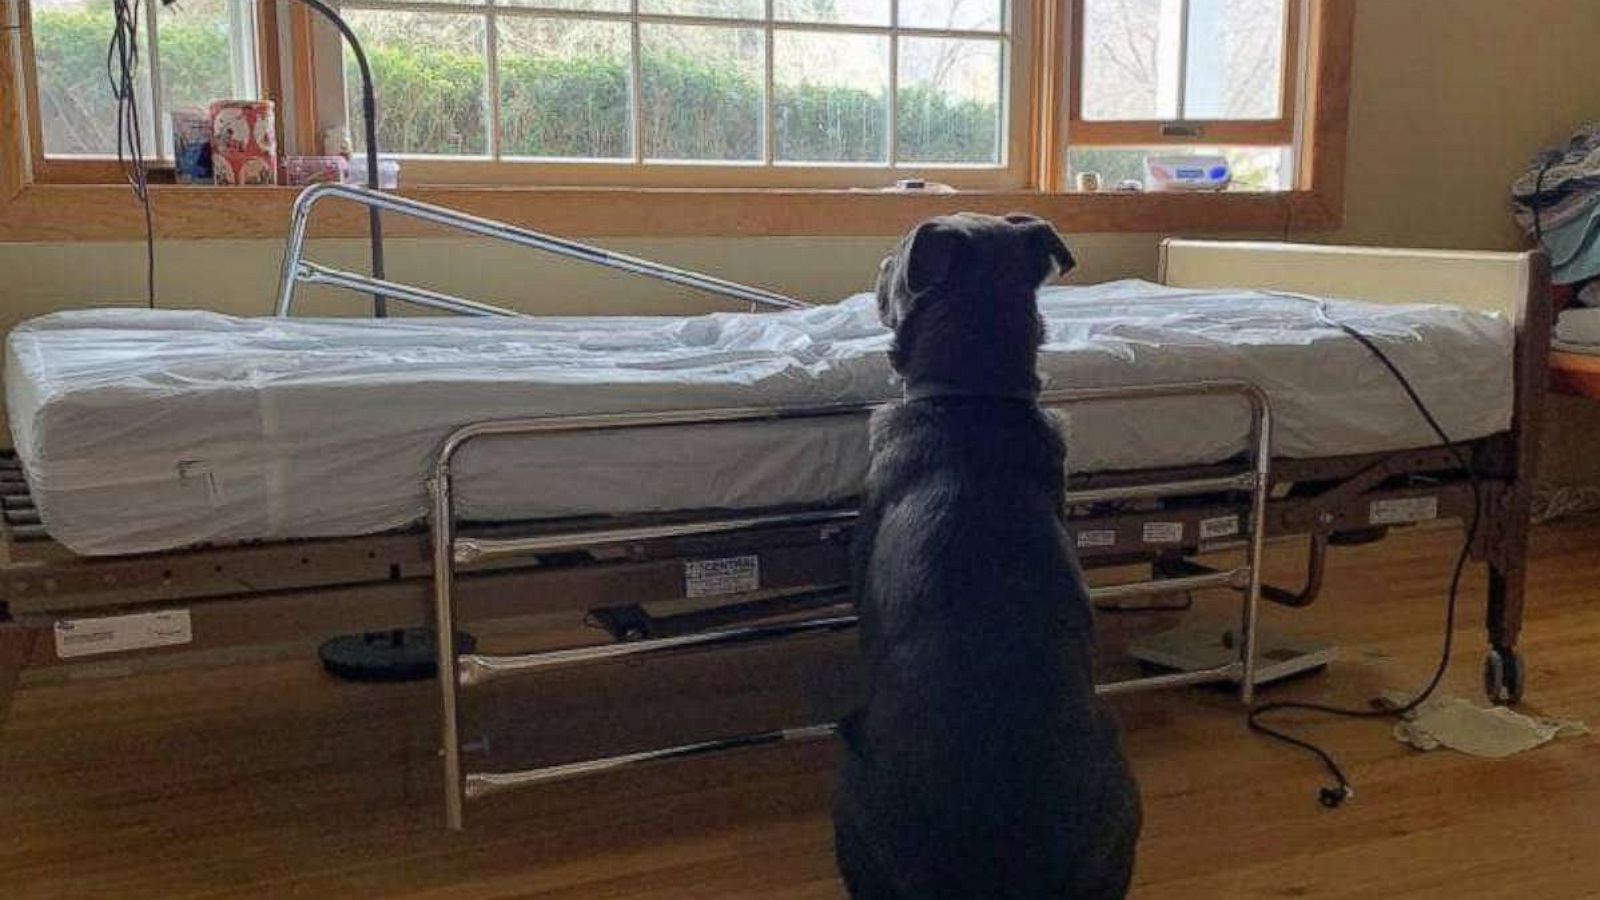 Heartbreaking Photo Of Dog Waiting For Deceased Owner Prompts